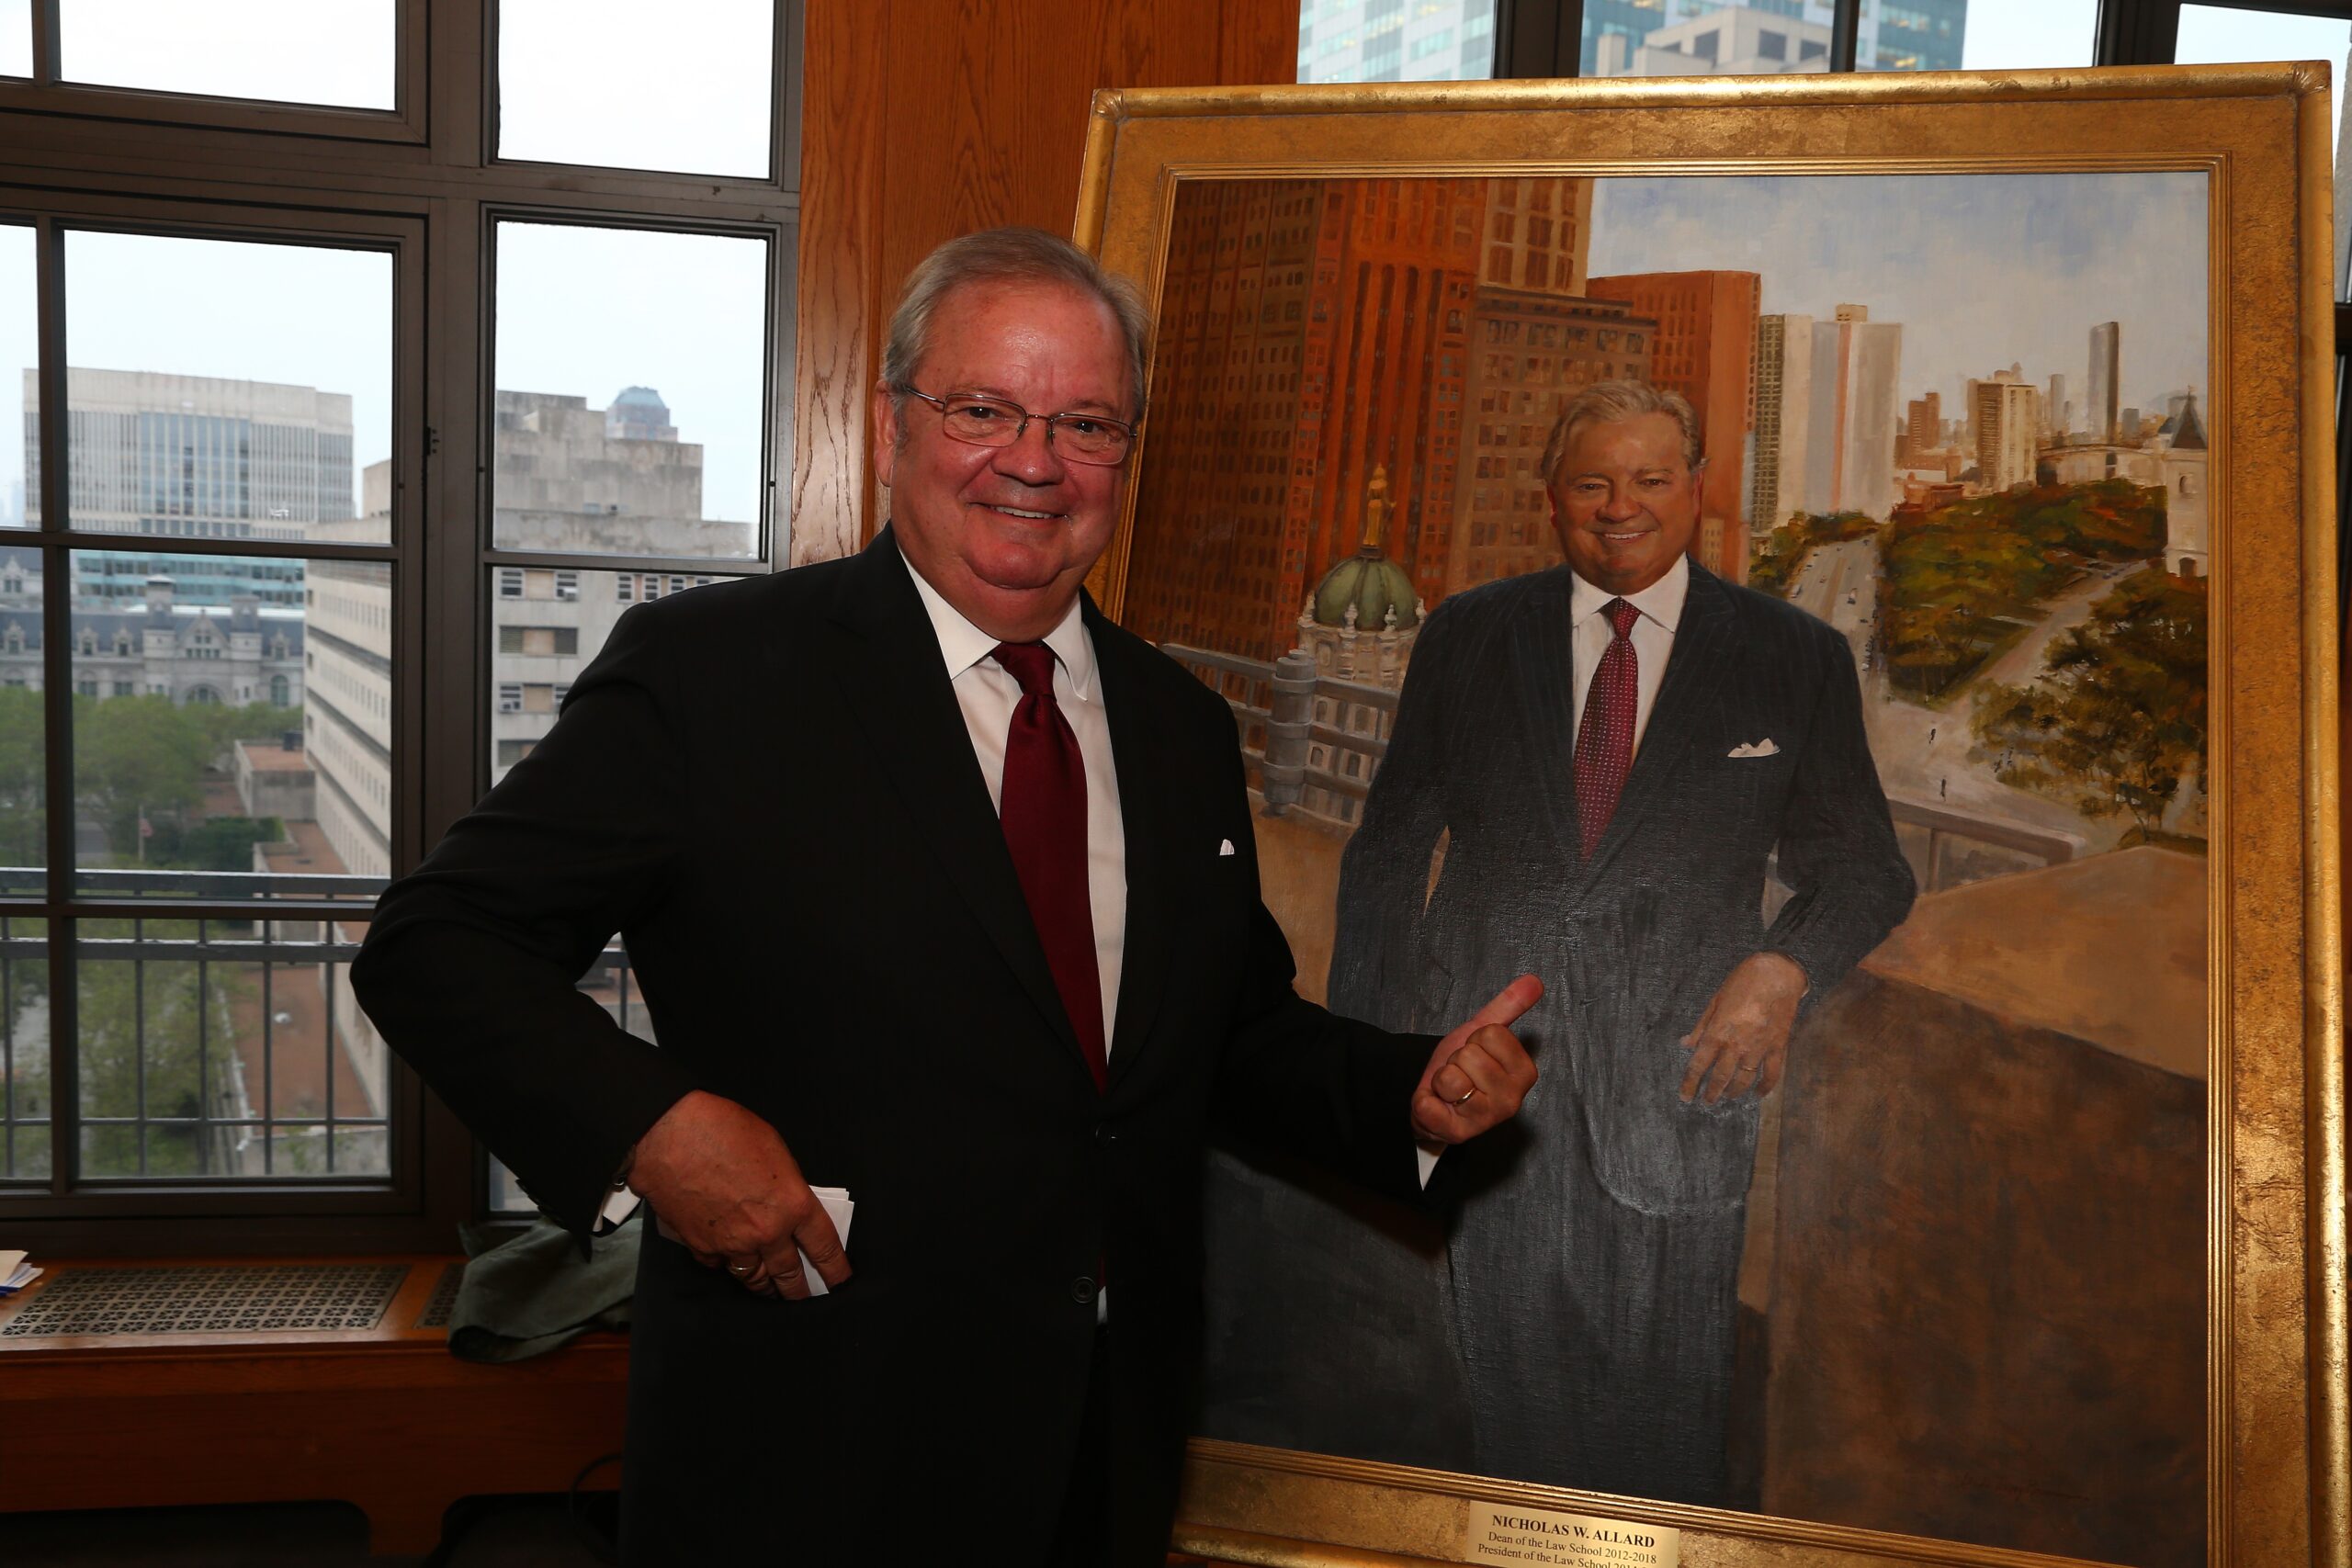 Nick Allard at his portrait hanging ceremony, commemorating his impactful tenure at Brooklyn Law School. Eagle file photo by Andy Katz